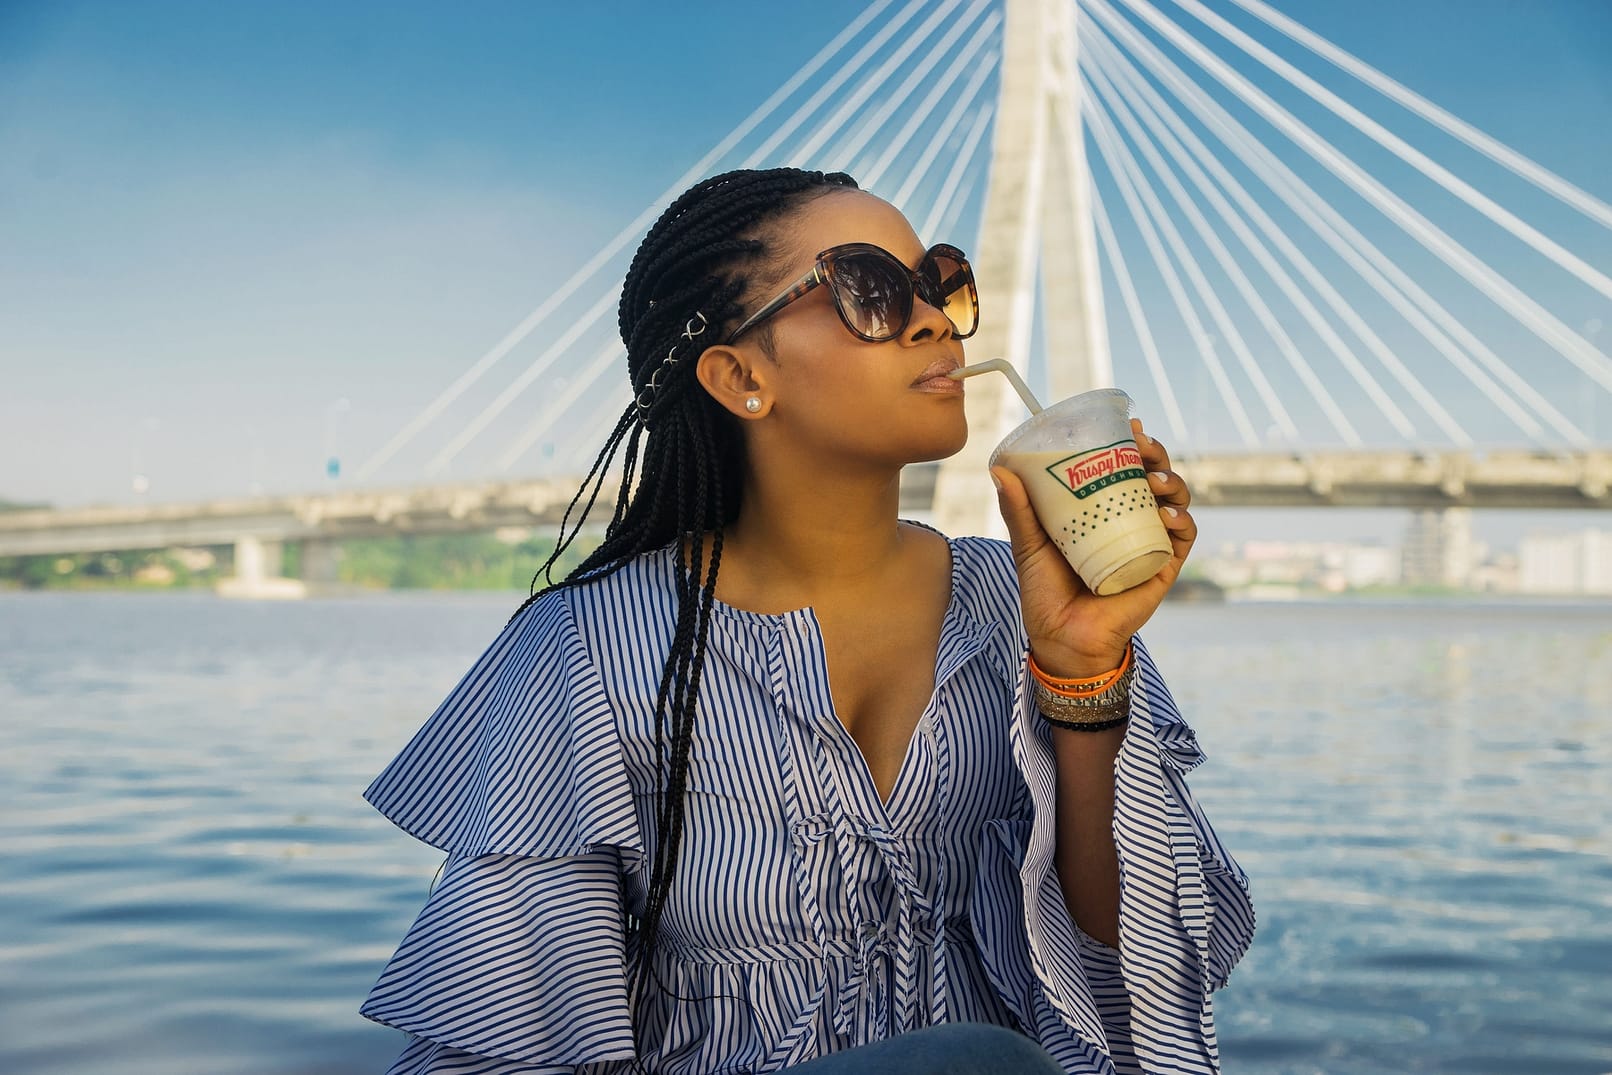 food-photographer-lagos-1117-collective-6- Lady Drinking Iced Tea